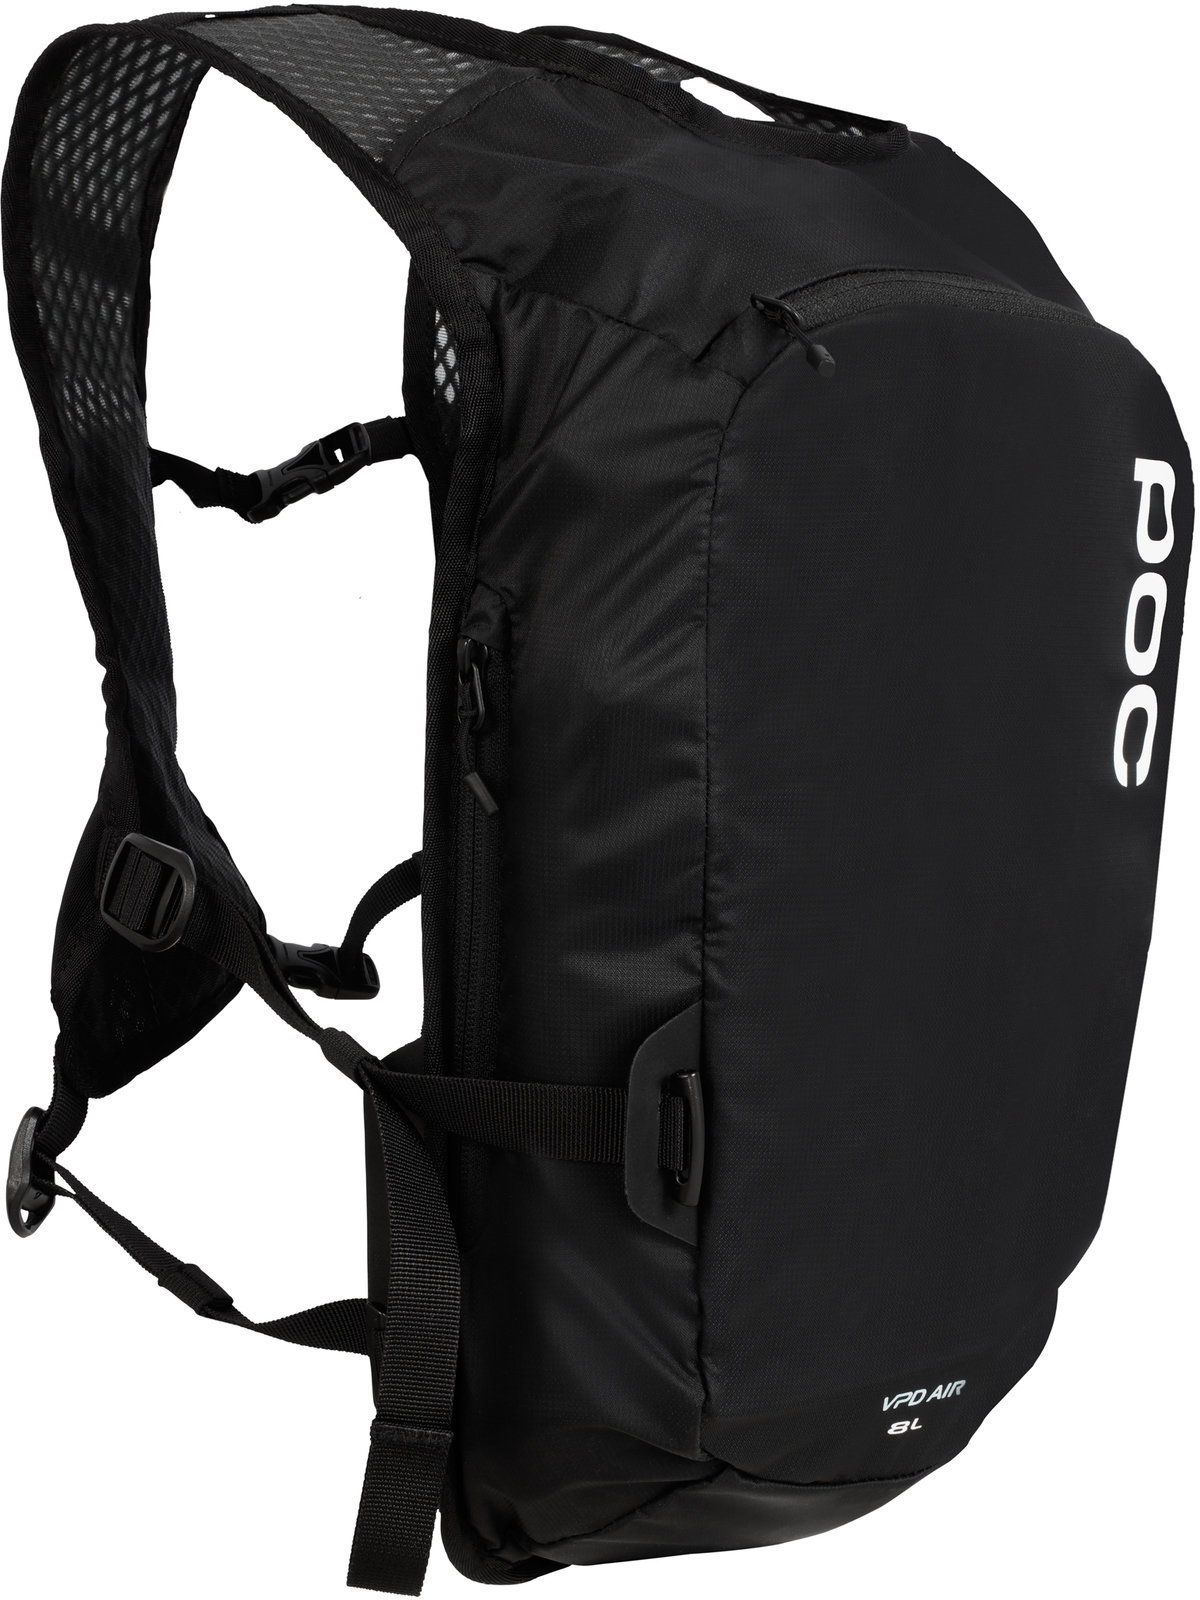 Cycling backpack and accessories POC Spine VPD Air Uranium Black Backpack